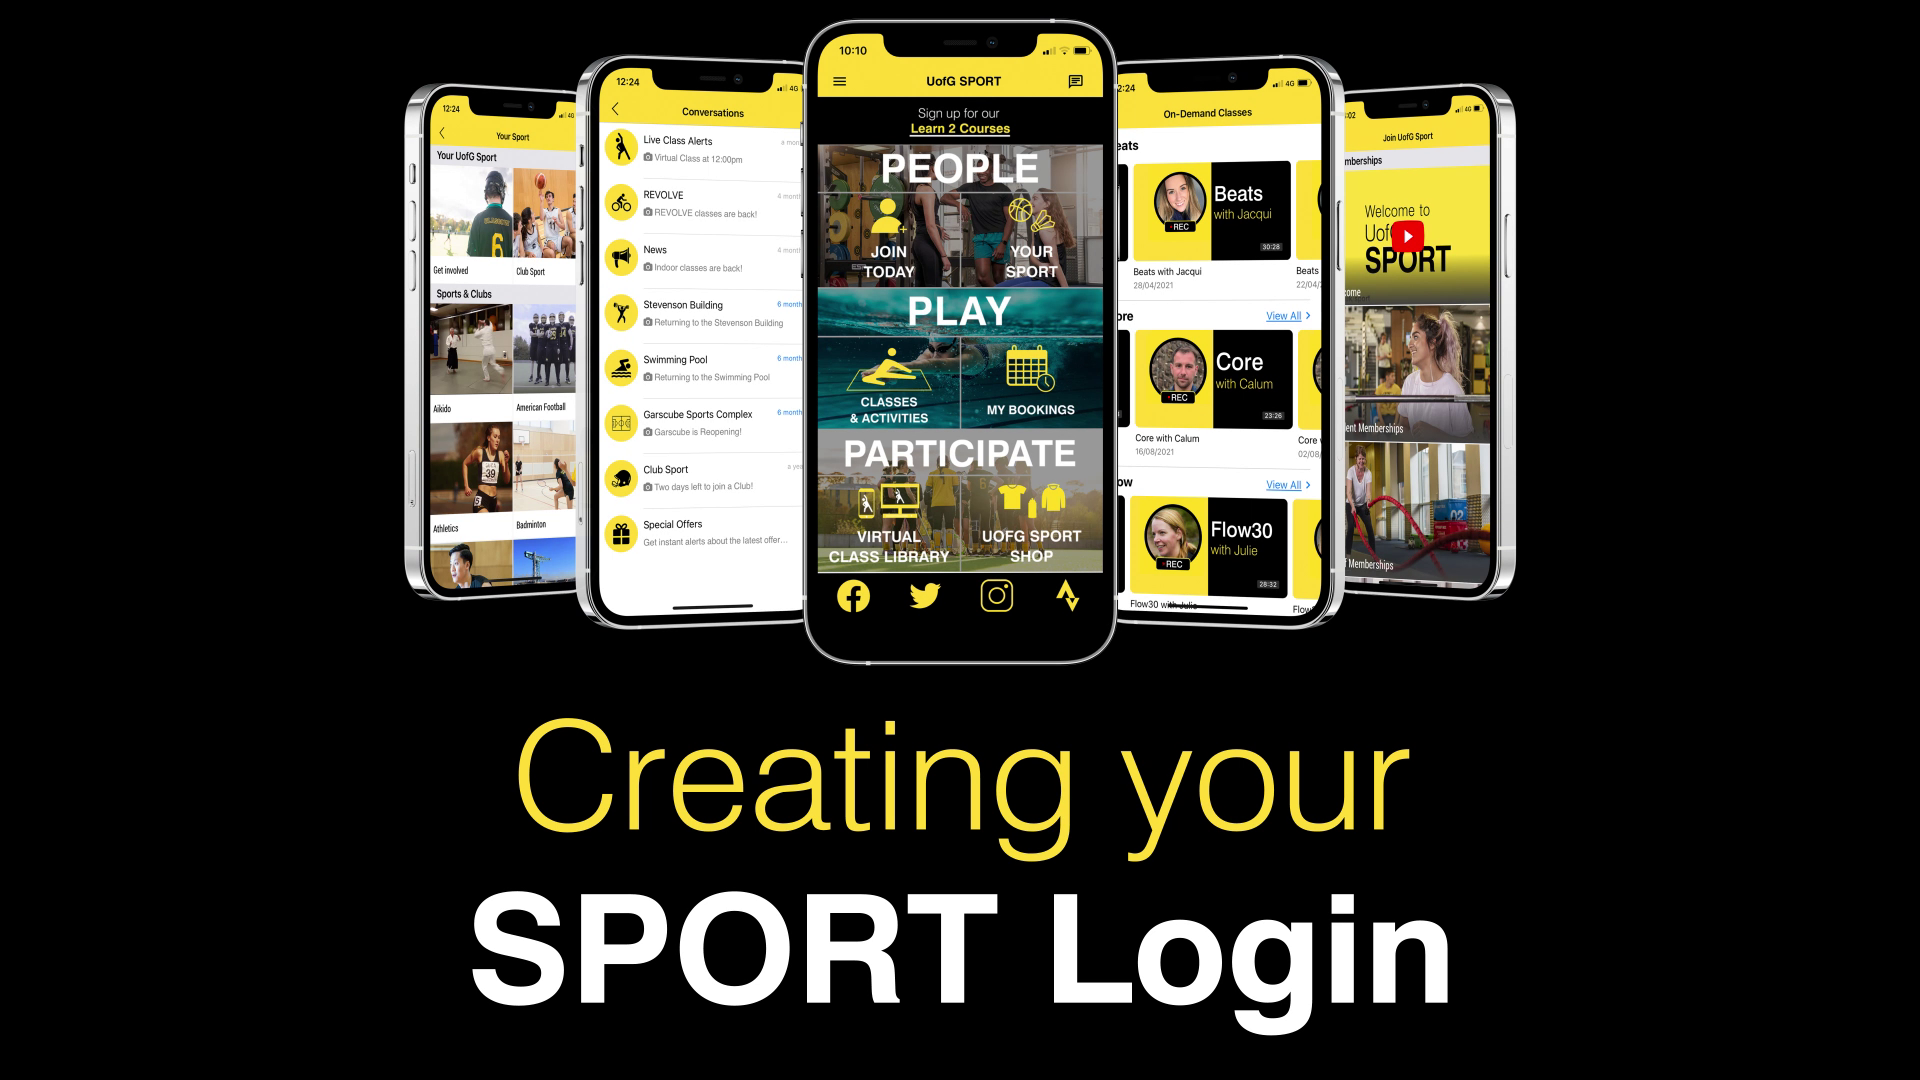 Creating your new UofG Sport Login